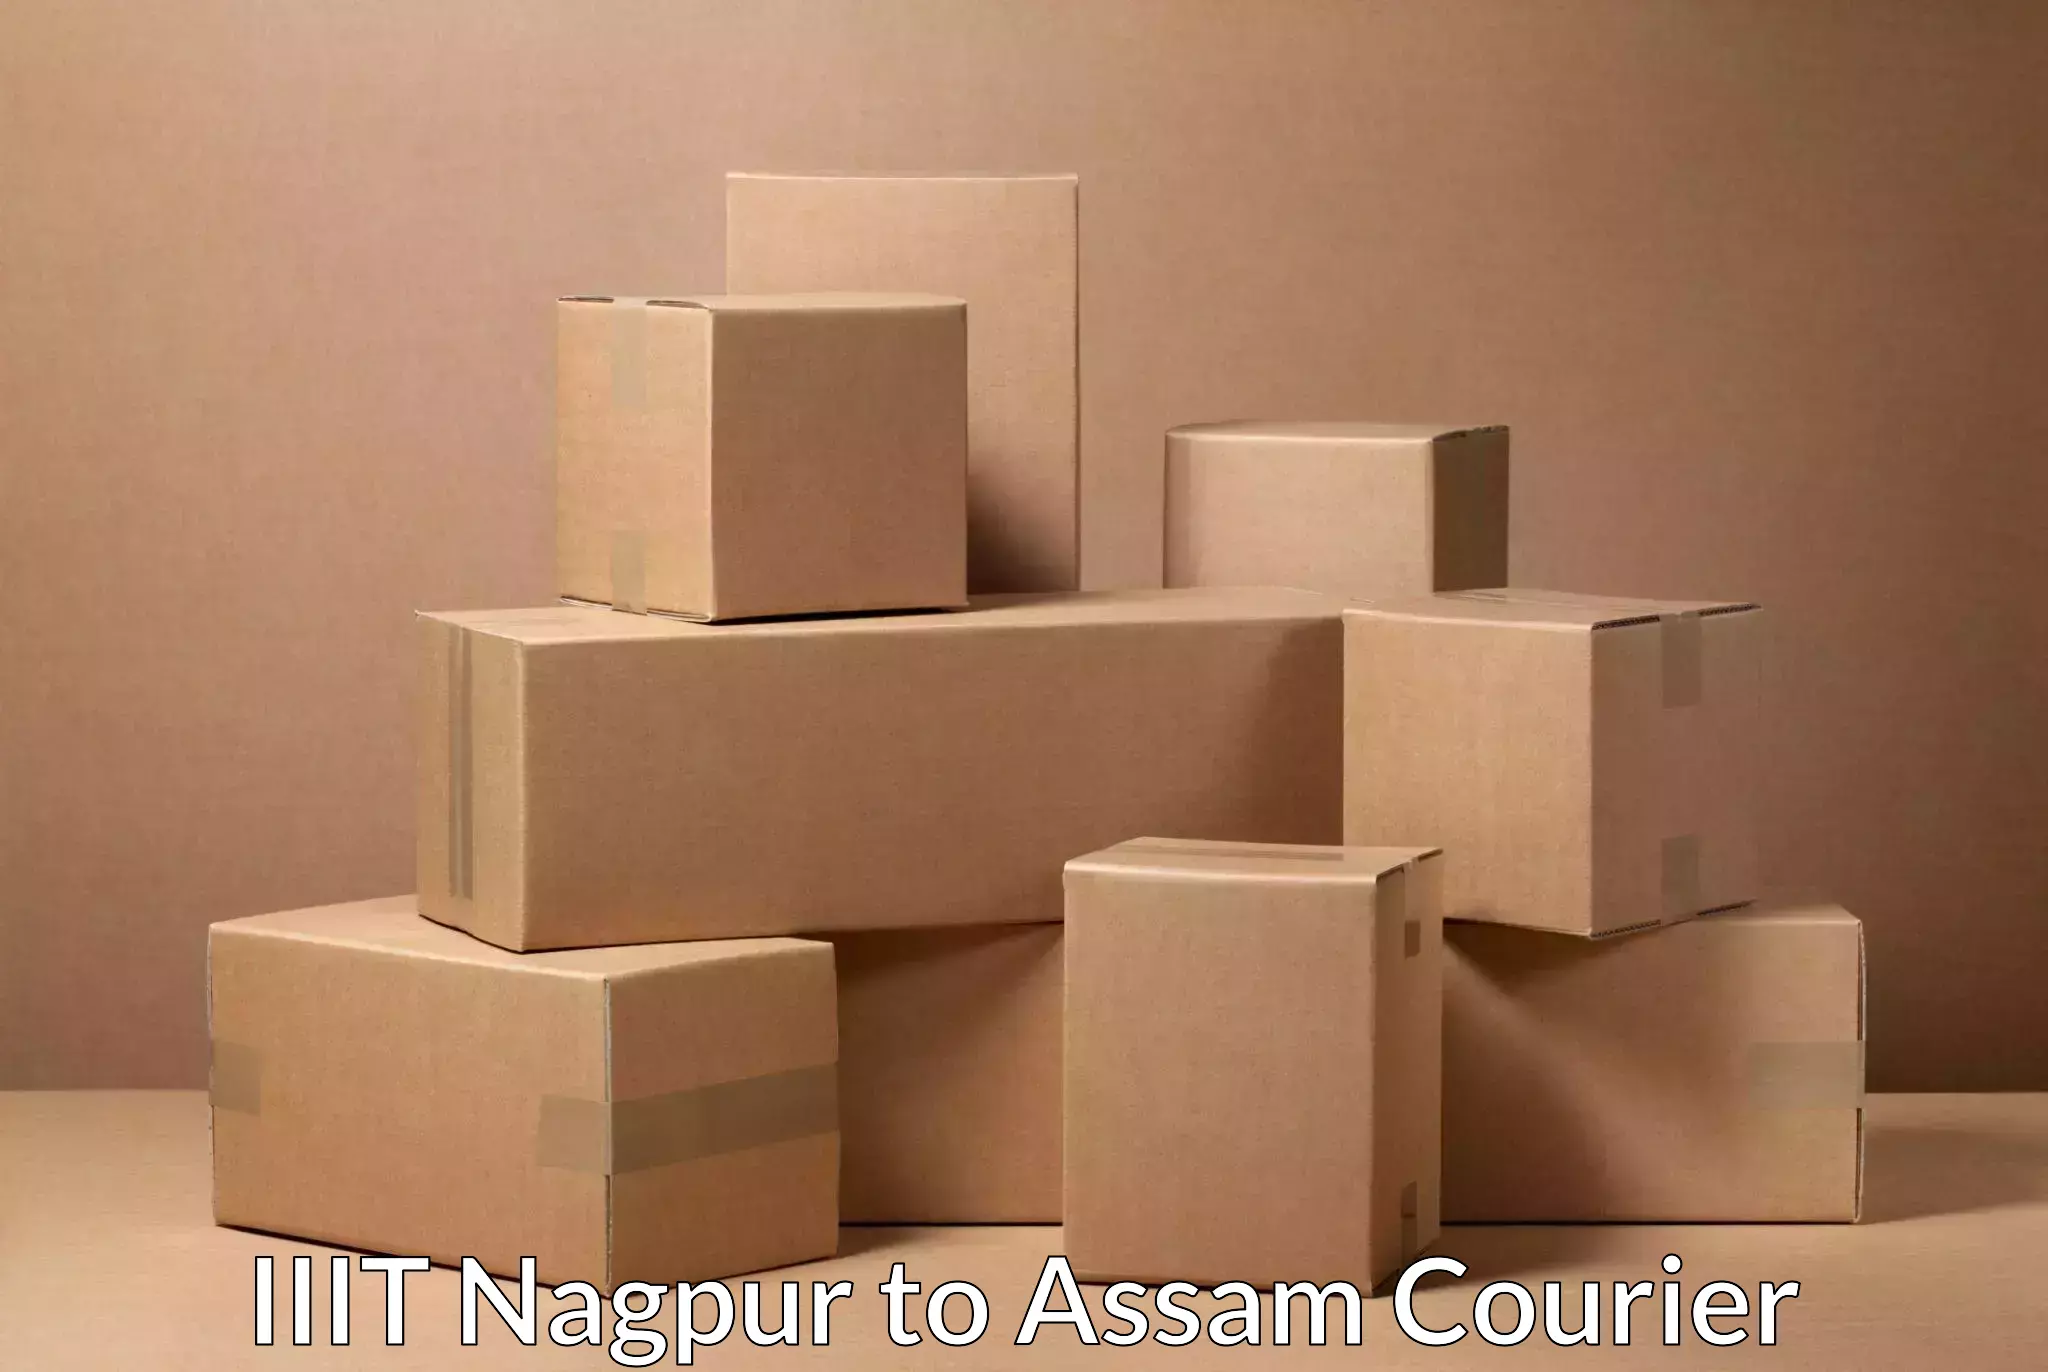 Courier service innovation IIIT Nagpur to Marigaon